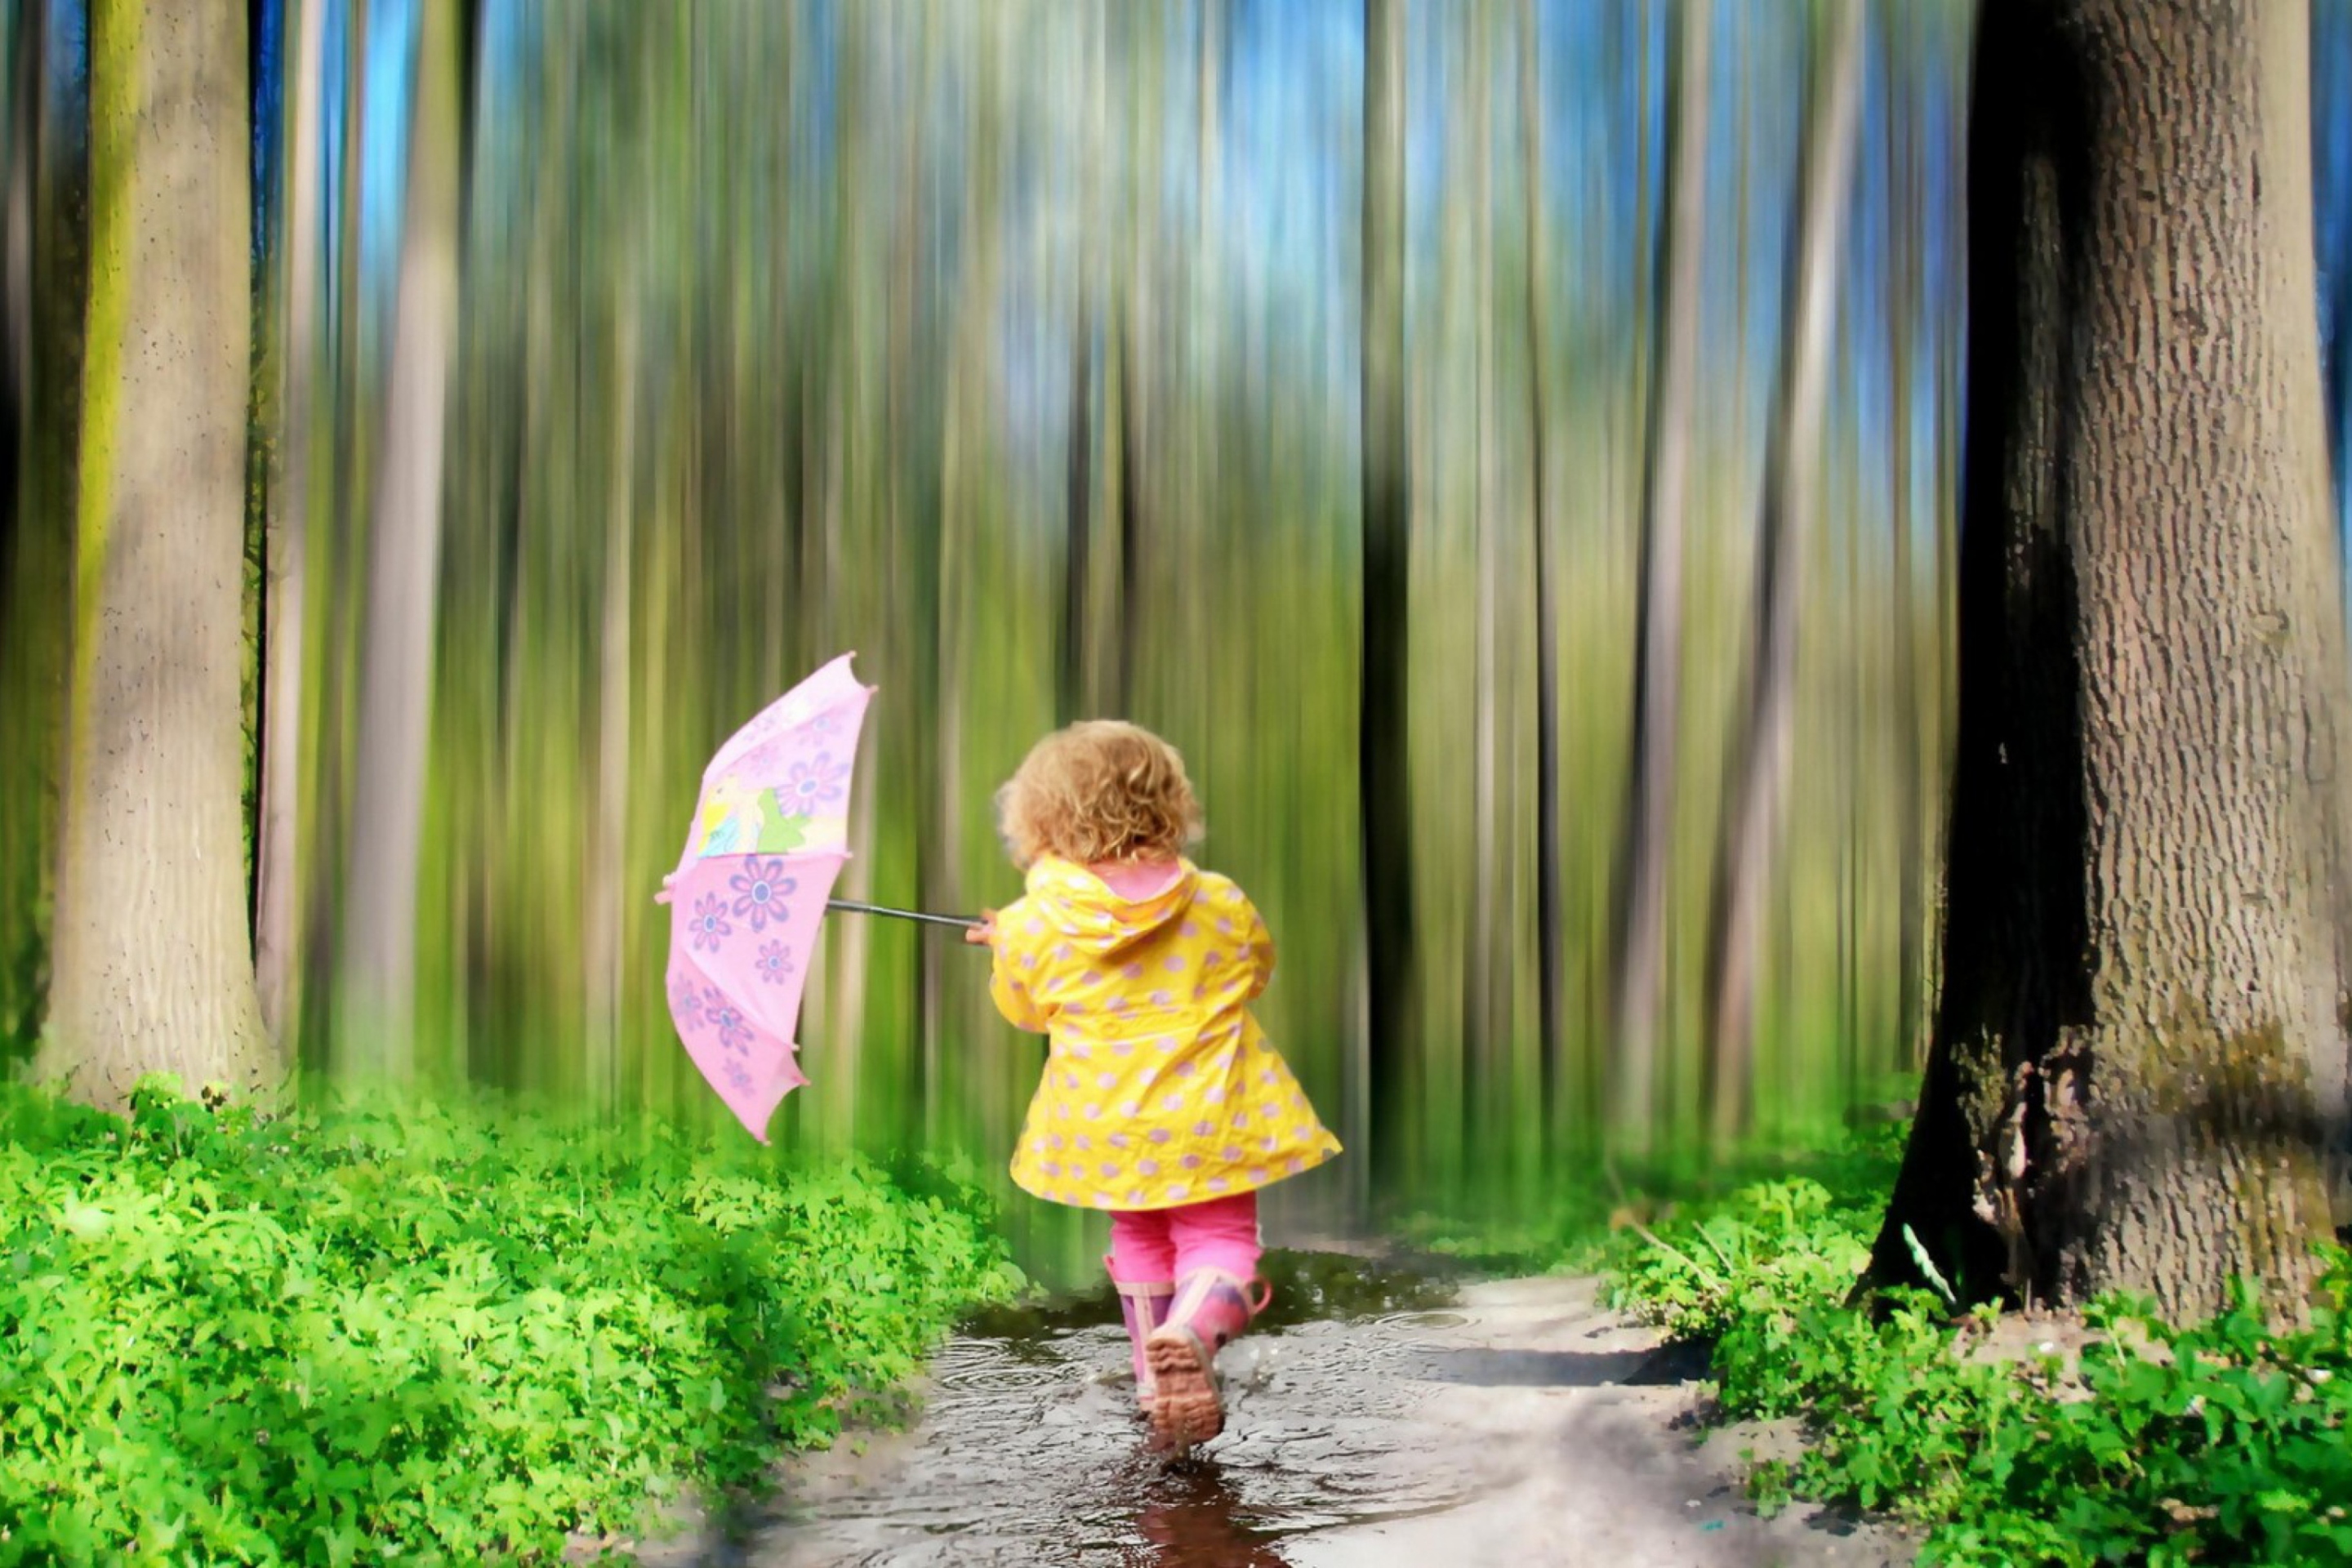 Child With Funny Pink Umbrella wallpaper 2880x1920